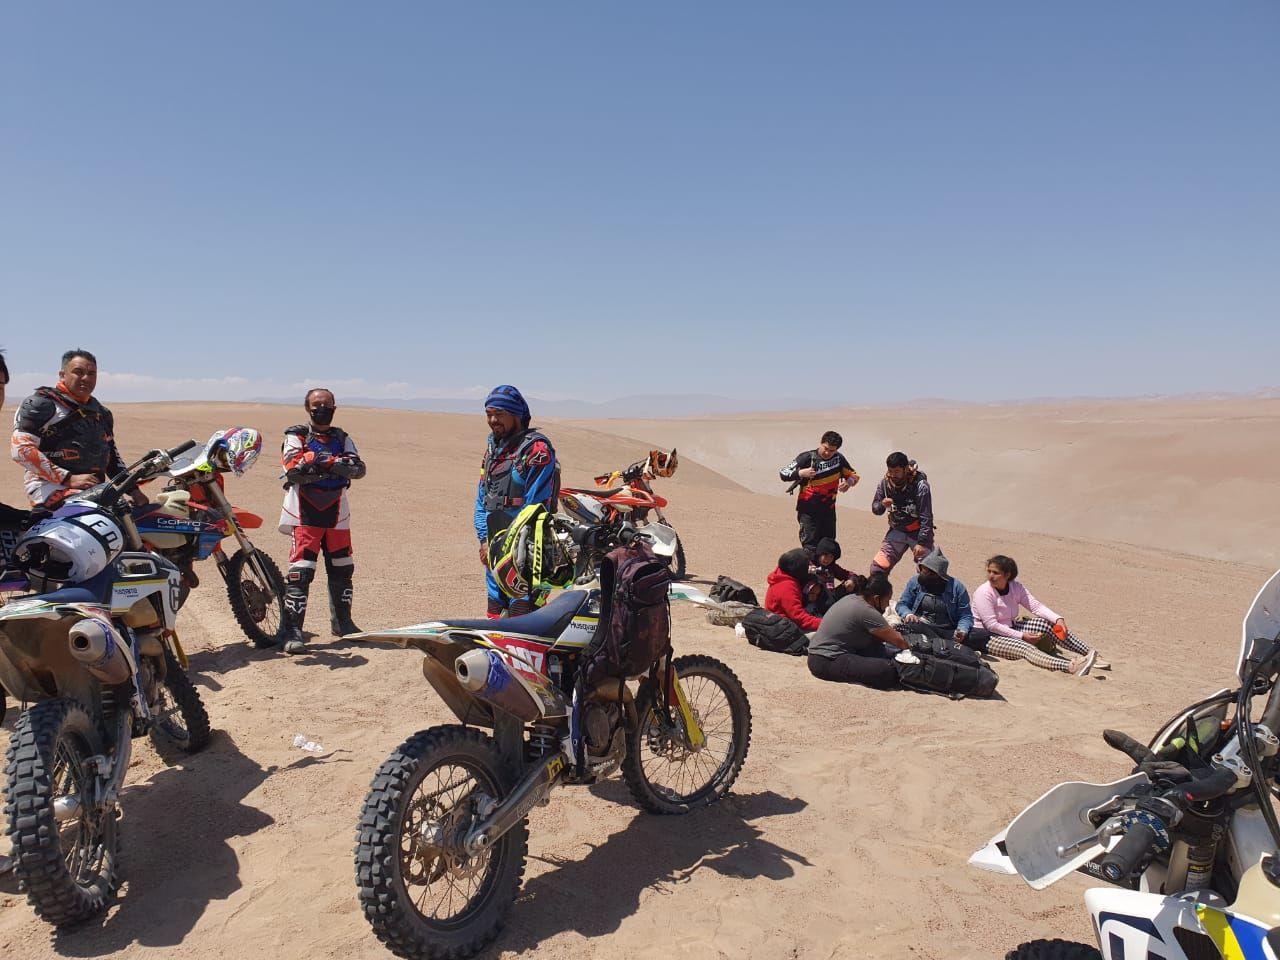 The motorcyclists with the second group of Venezuelans. Image courtesy of Team Tuareg. Chile, undated.